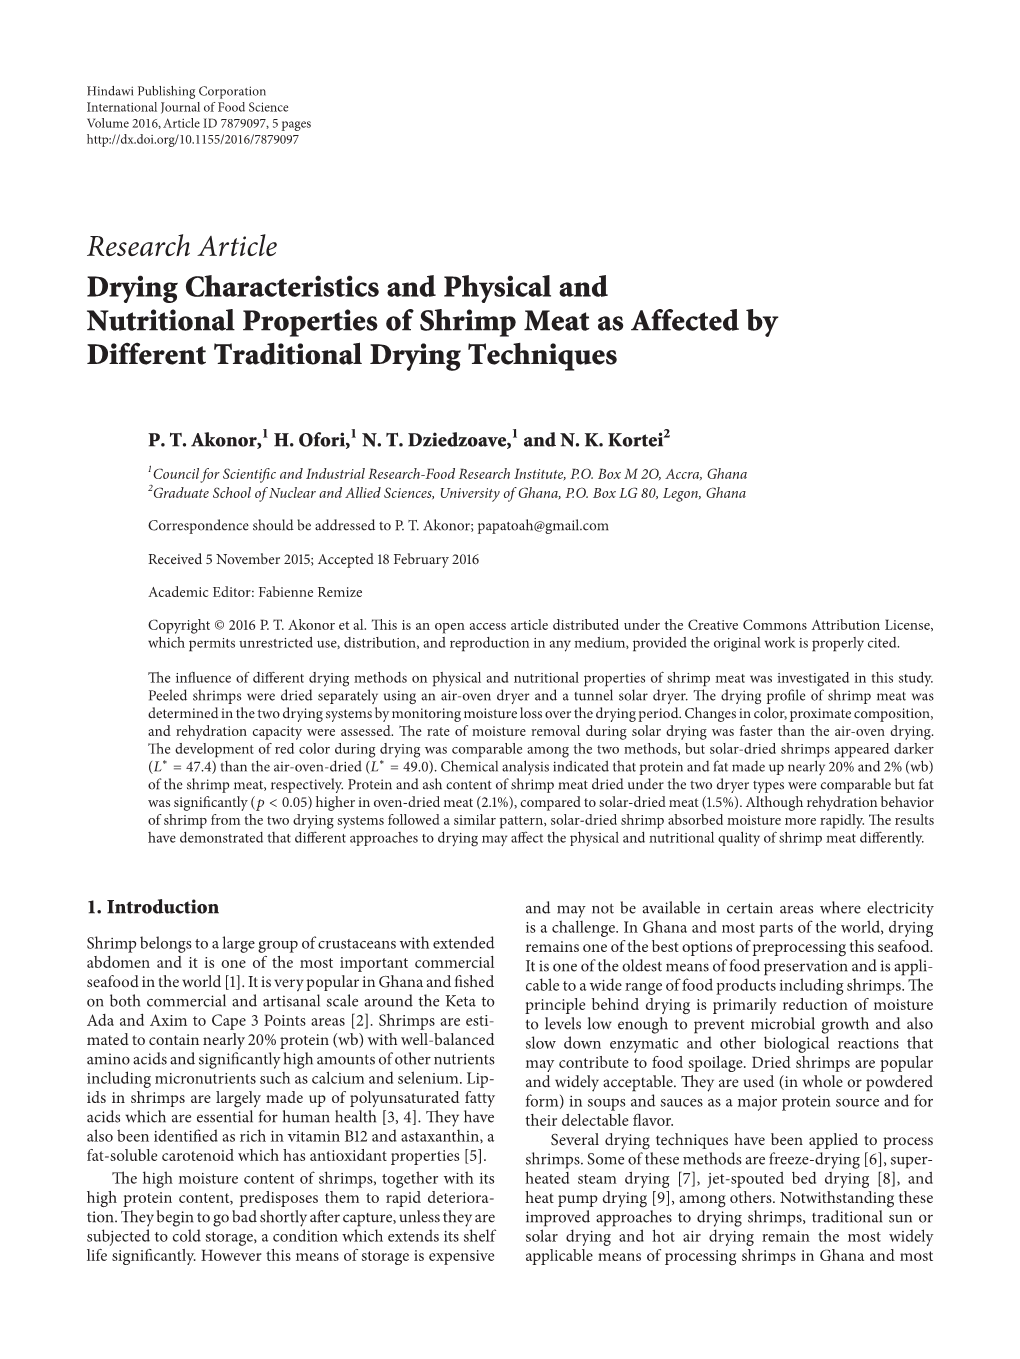 Drying Characteristics and Physical and Nutritional Properties of Shrimp Meat As Affected by Different Traditional Drying Techniques